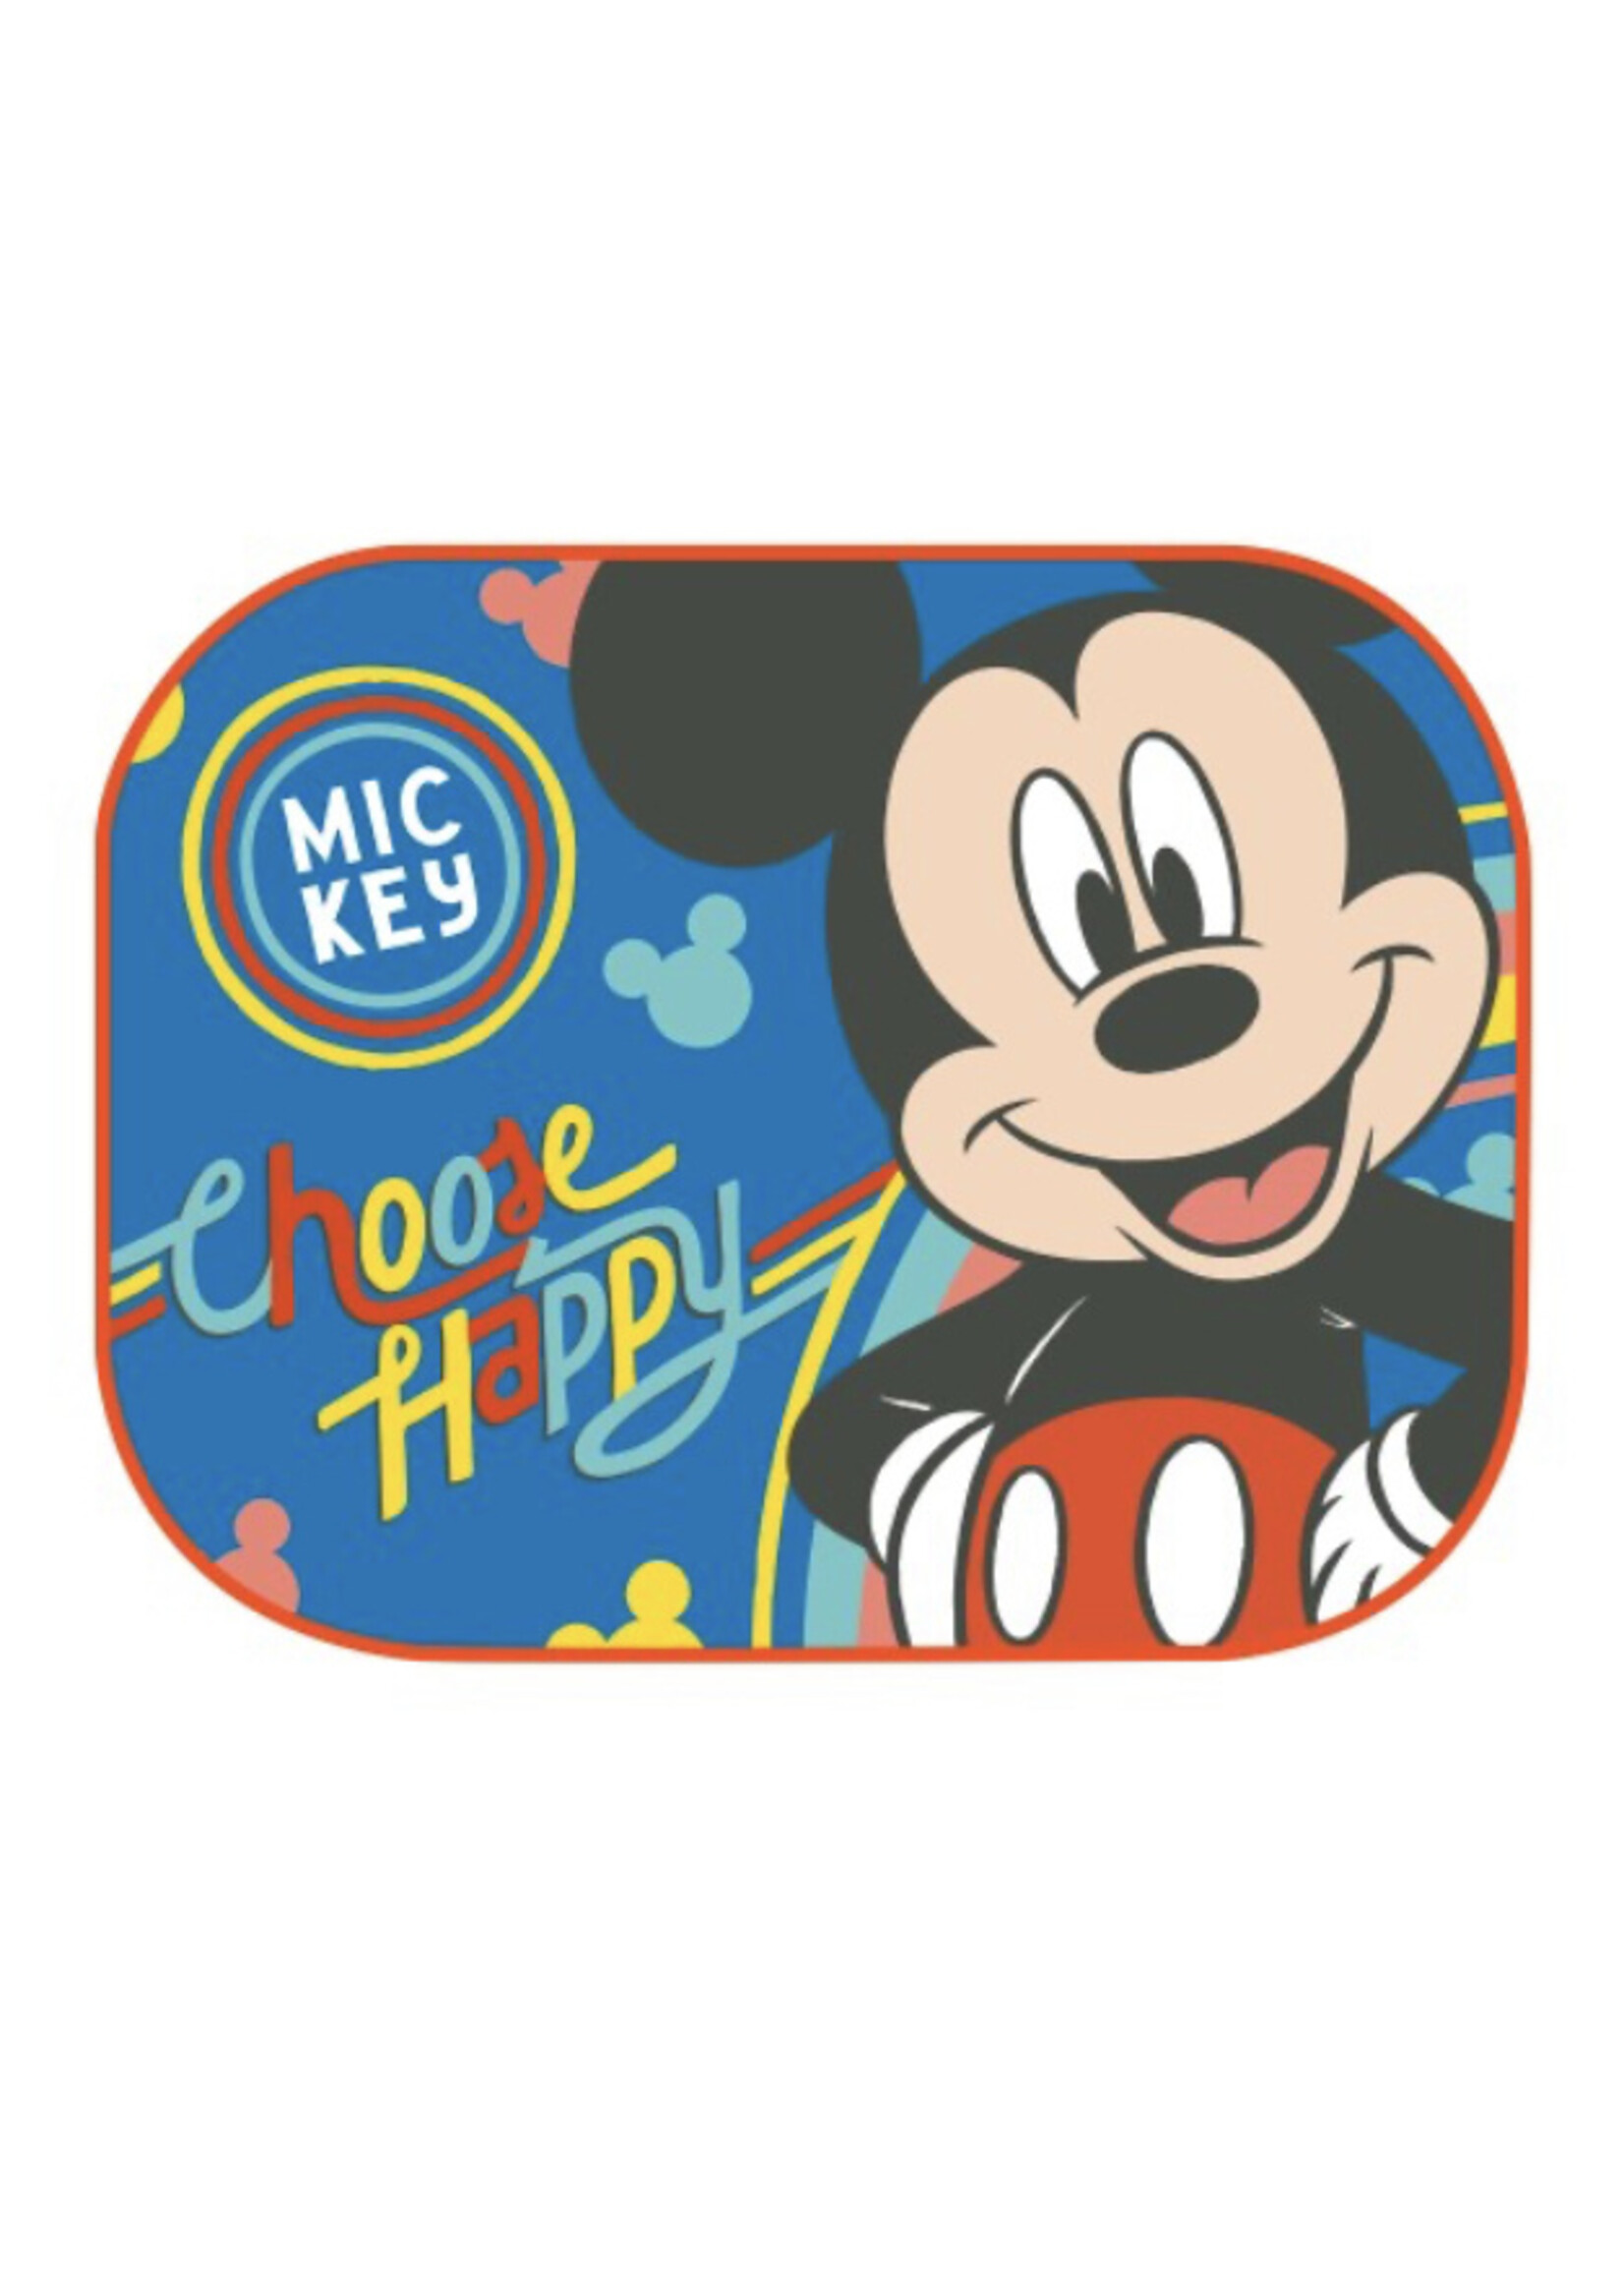 Disney Car sunshade Mickey and Minnie Mouse from Disney blue and yellow